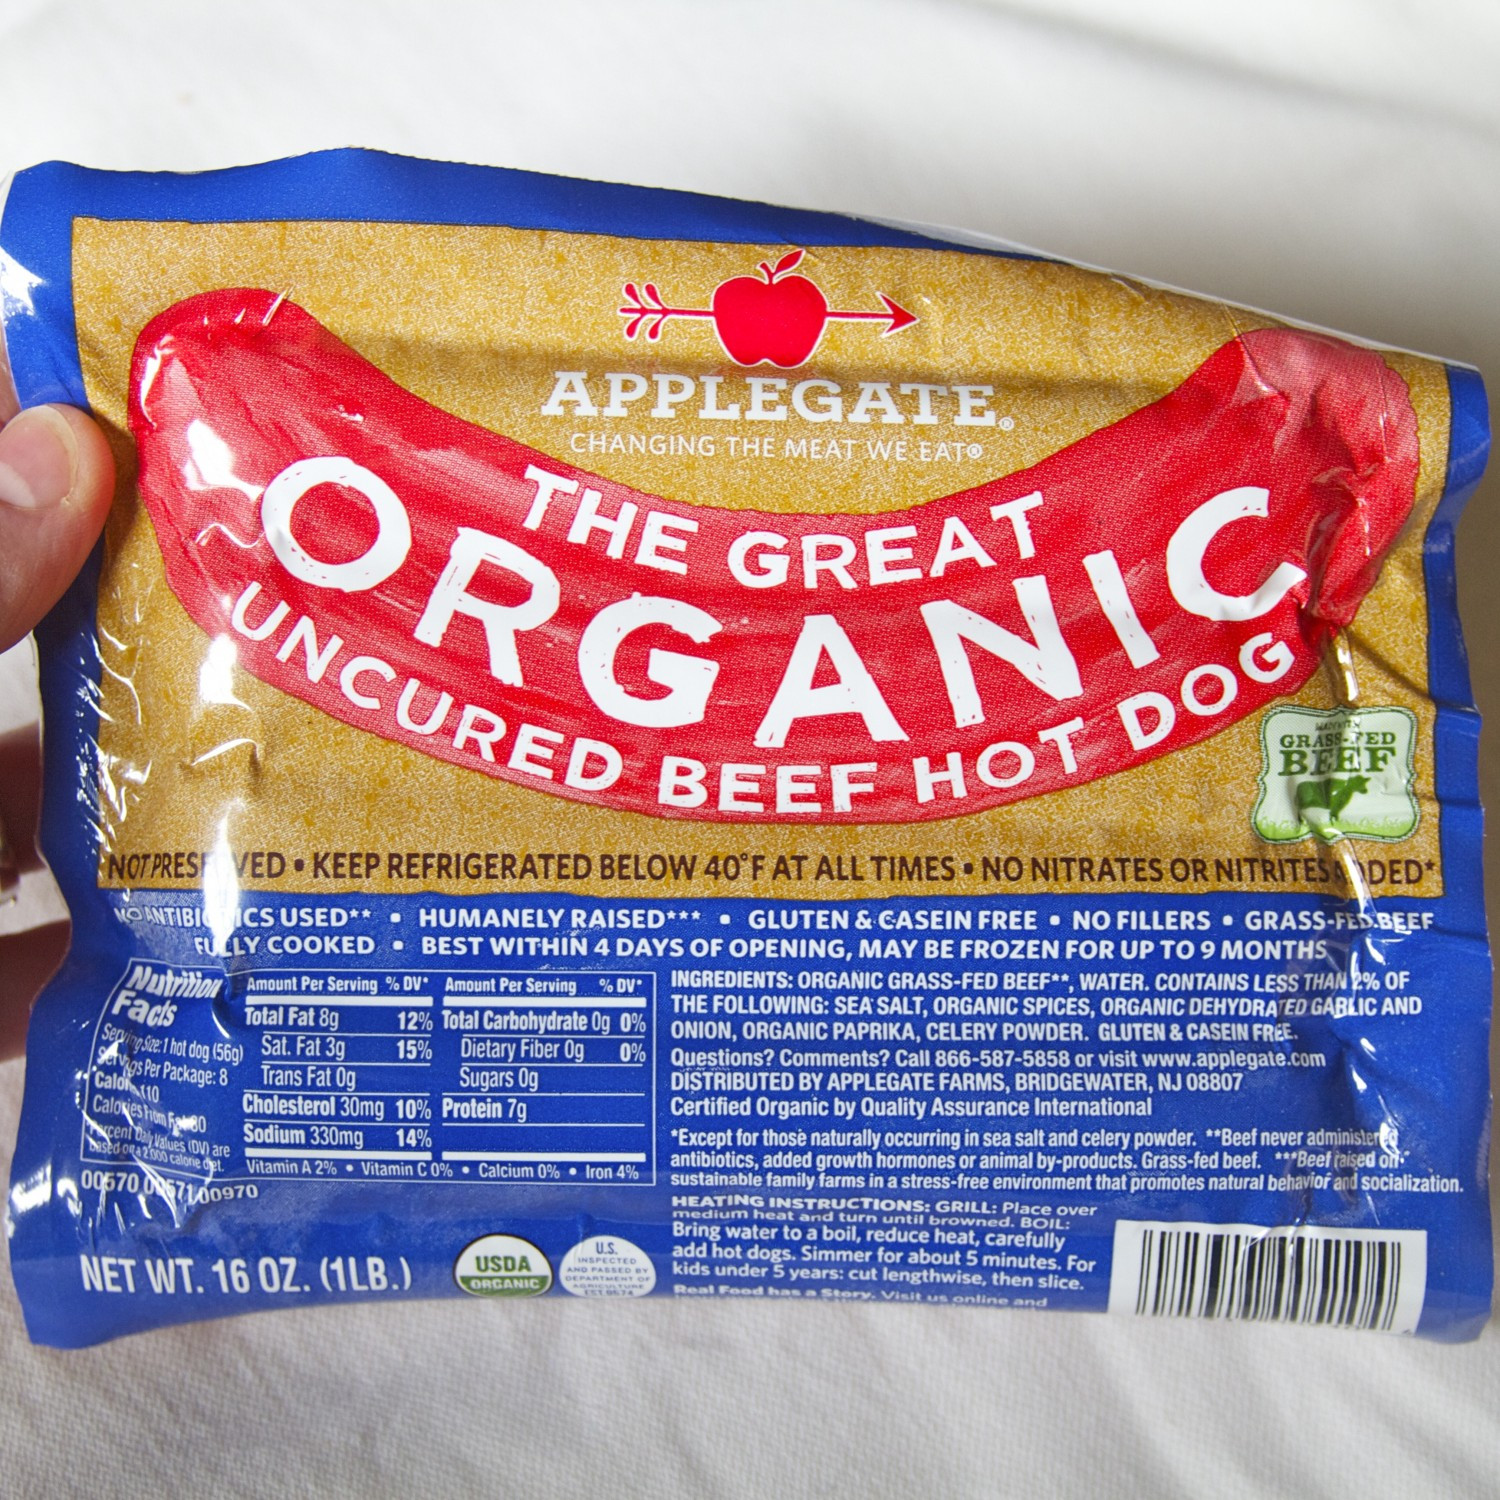 Applegate Organic Hot Dogs
 Applegate Farms Uncured Hot Dogs for a Paleo Diet